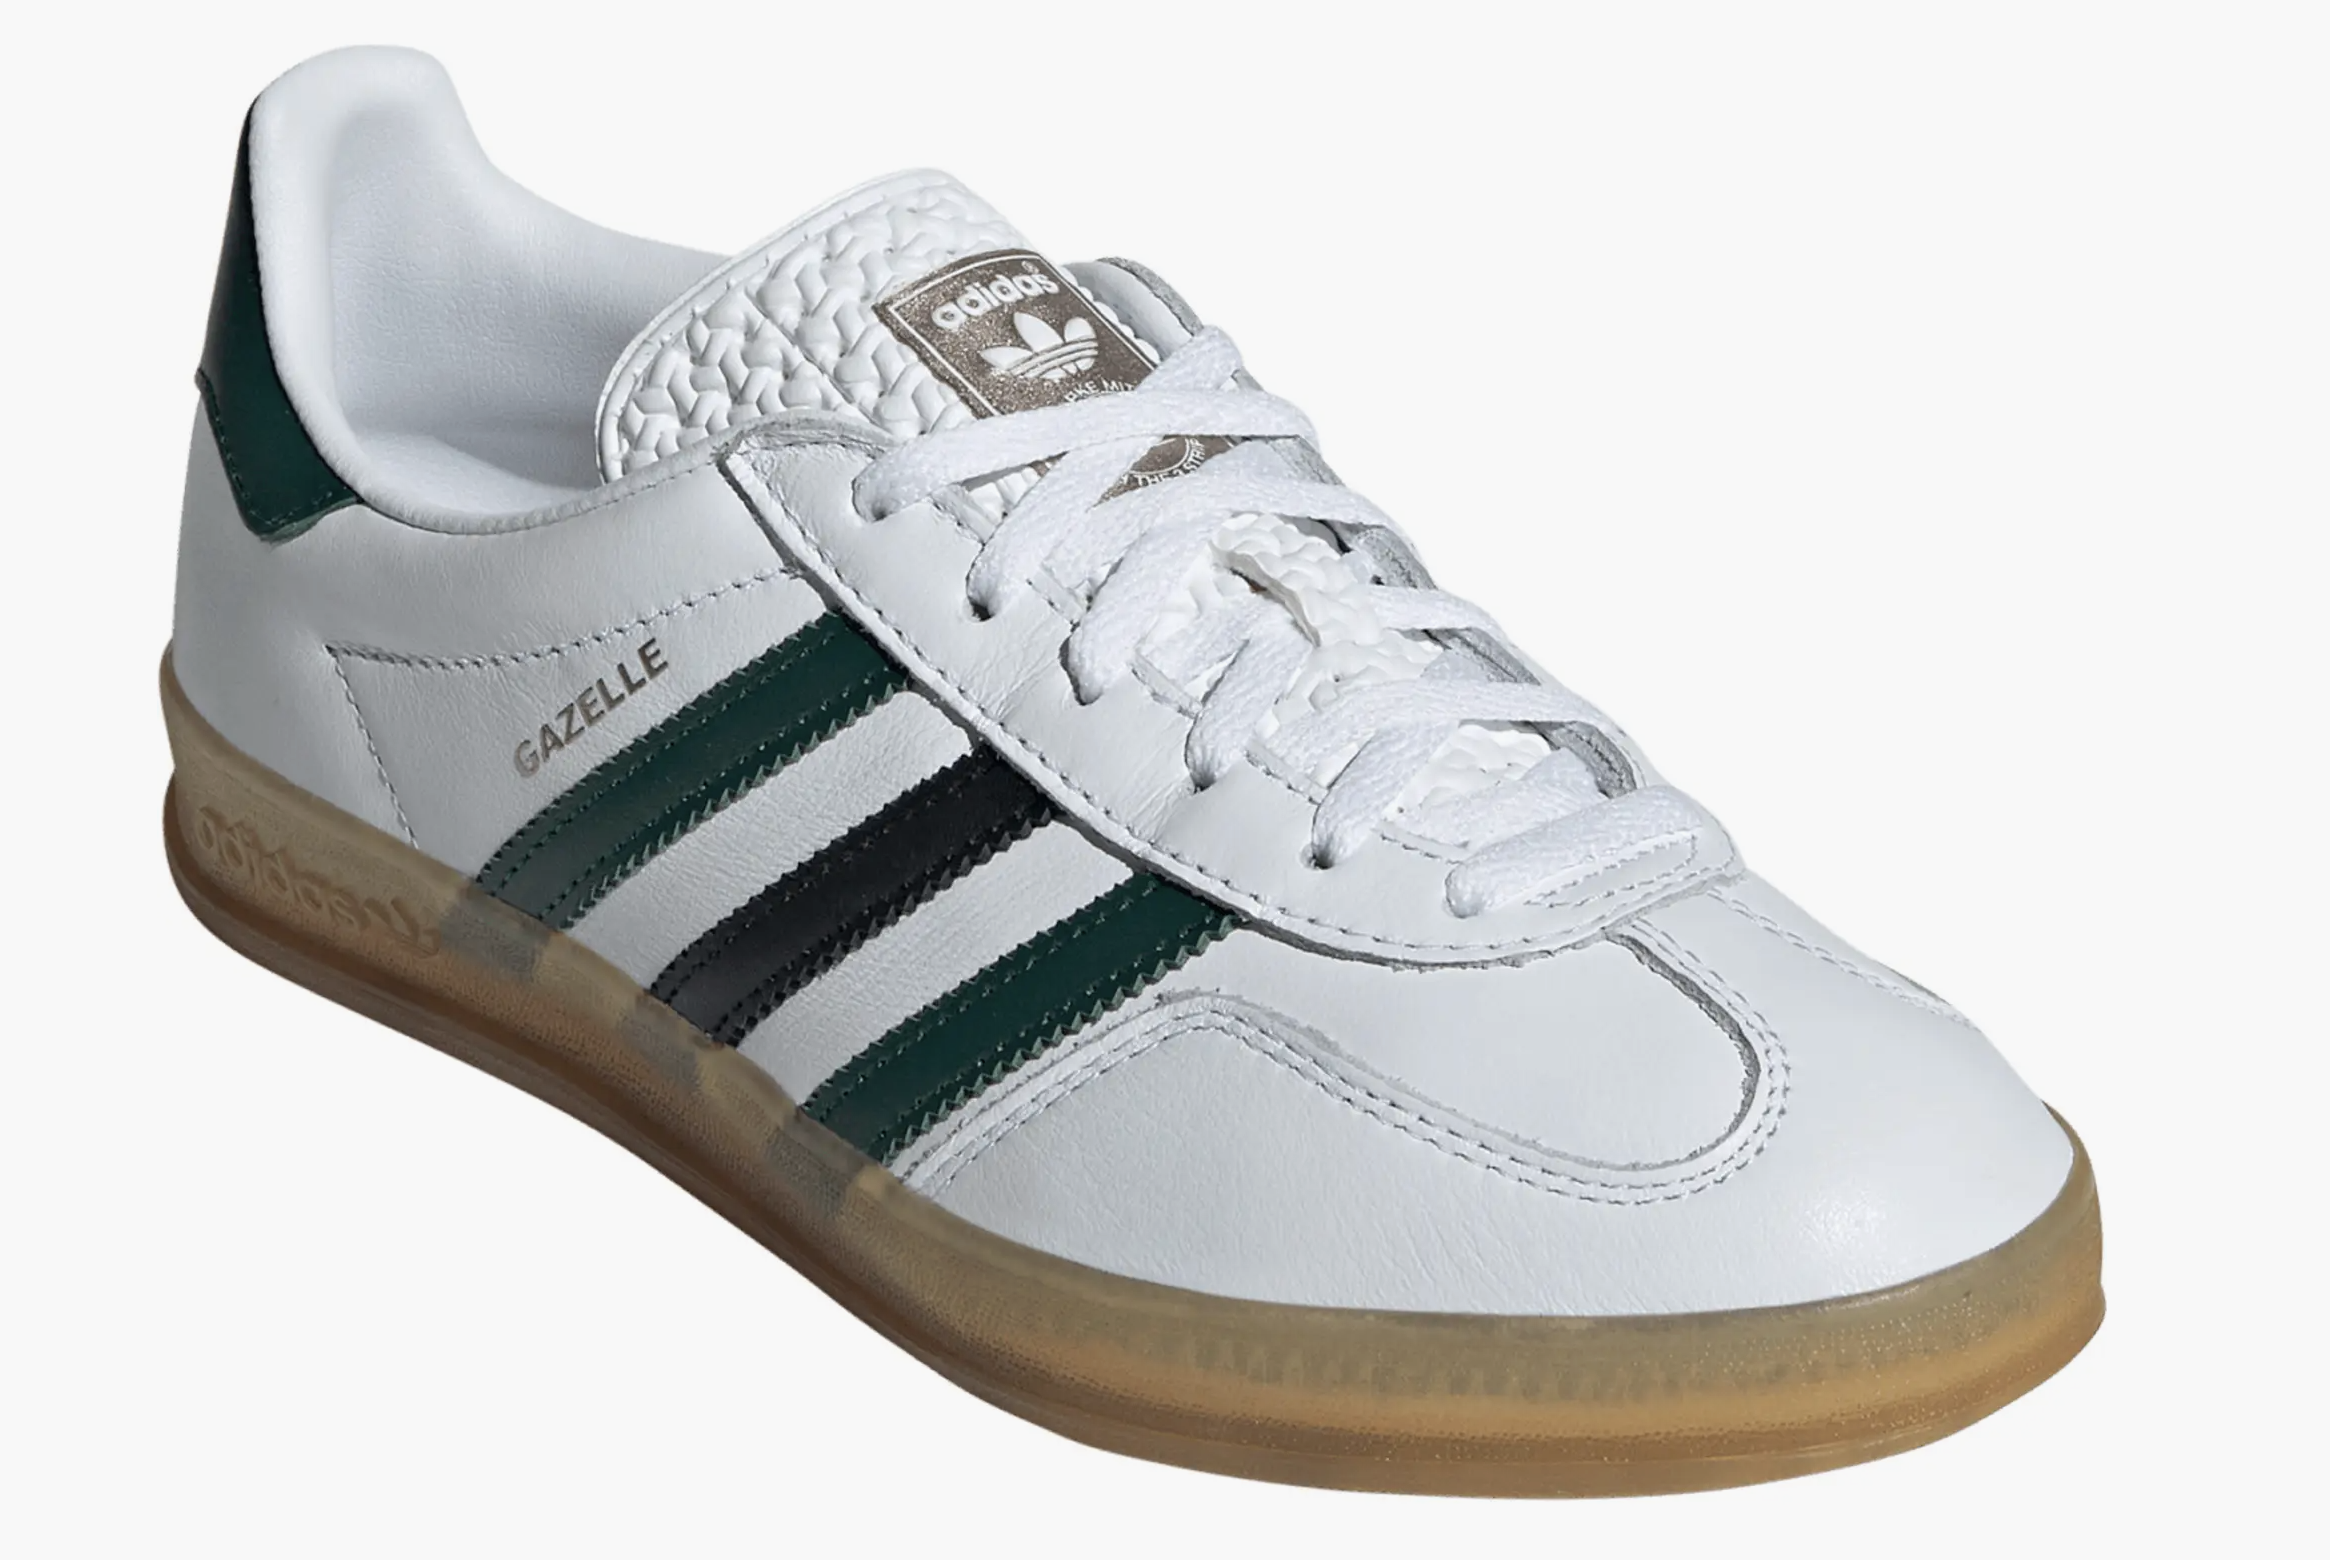 white and green adidas tennis shoe - nordstrom